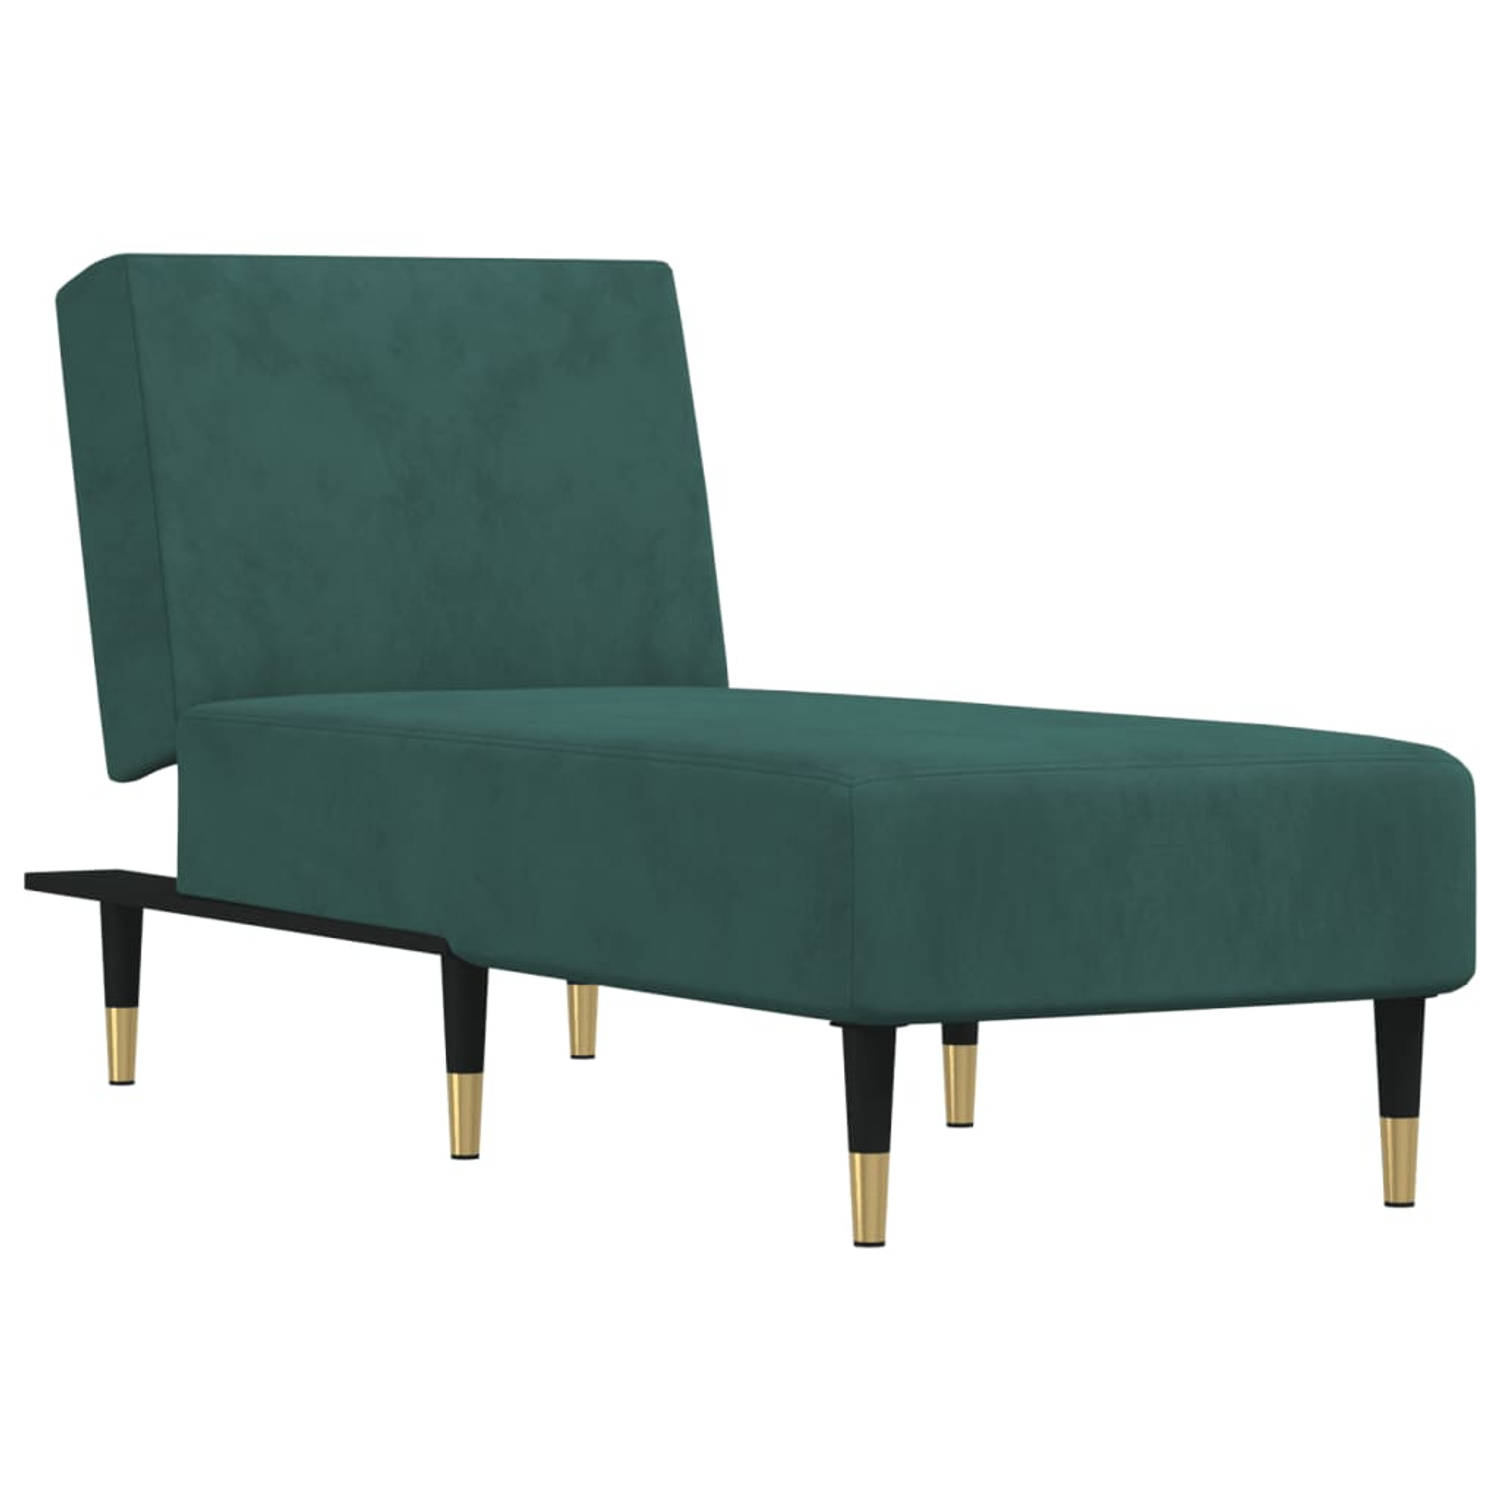 The Living Store Chaise longue fluweel donkergroen - Chaise longue